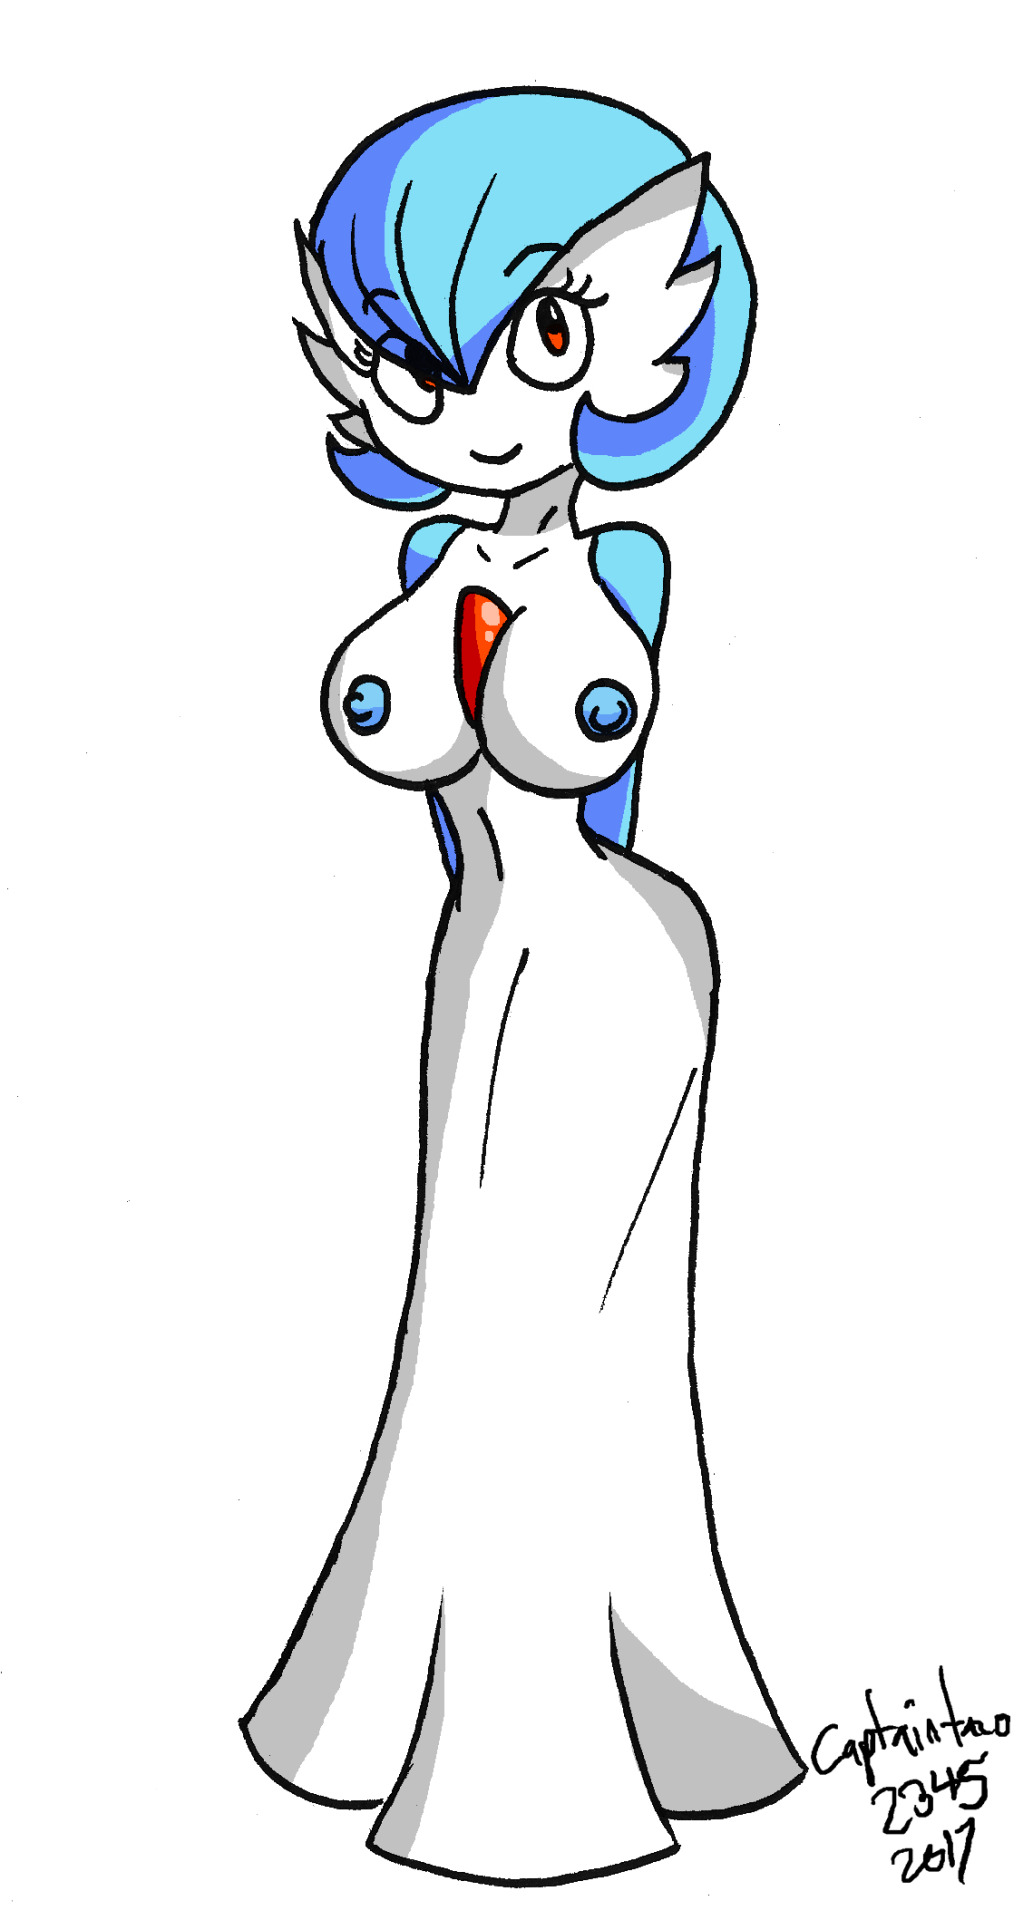 Shiny Gardevoir with some big ol’ tiddies. I know Pokemon isn’t currently the